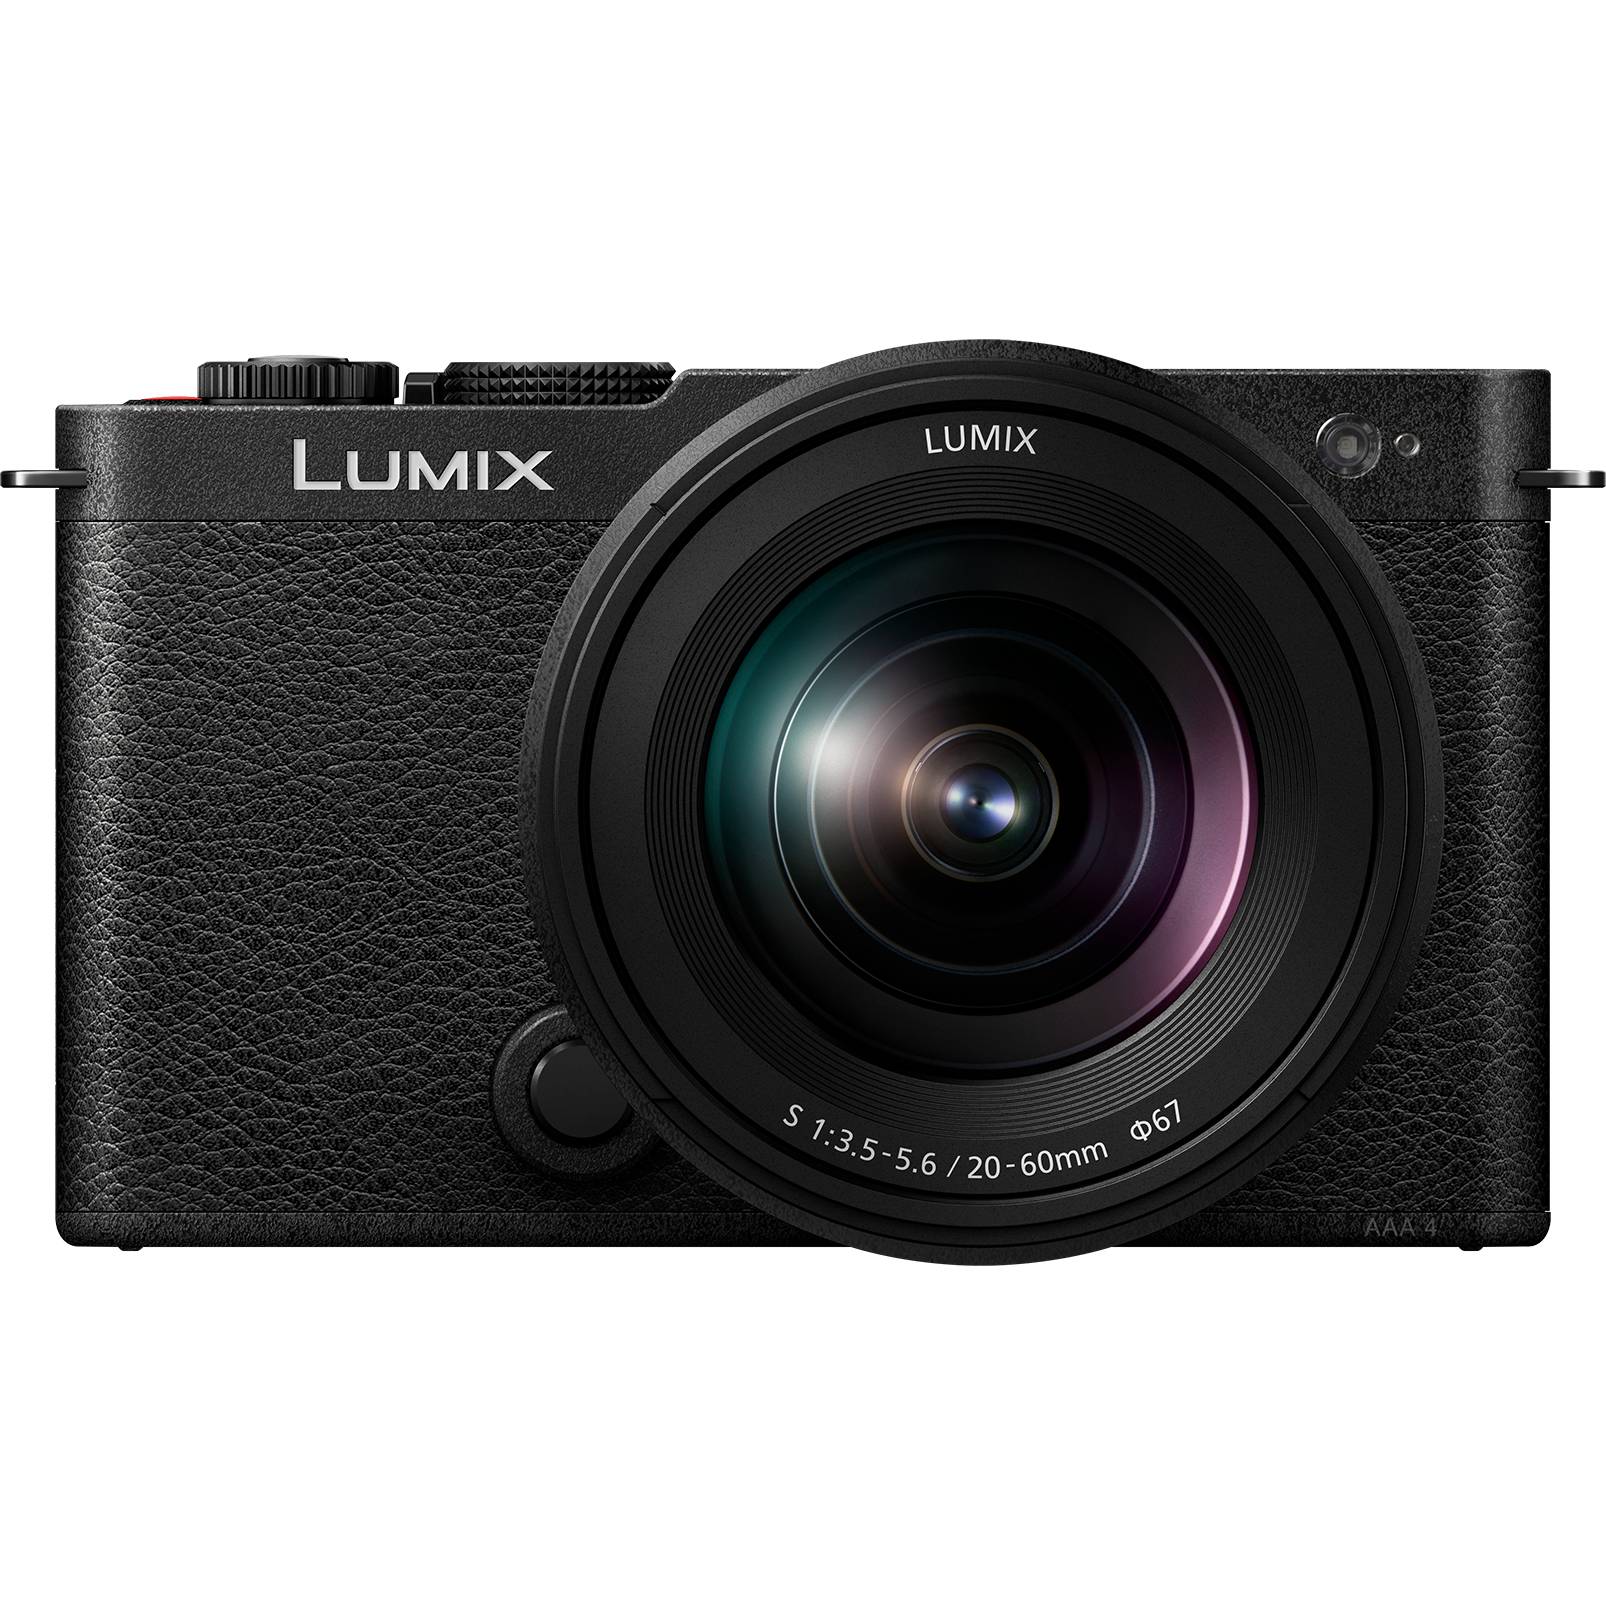 Discover the Power of Compact Photography with the LUMIX S9